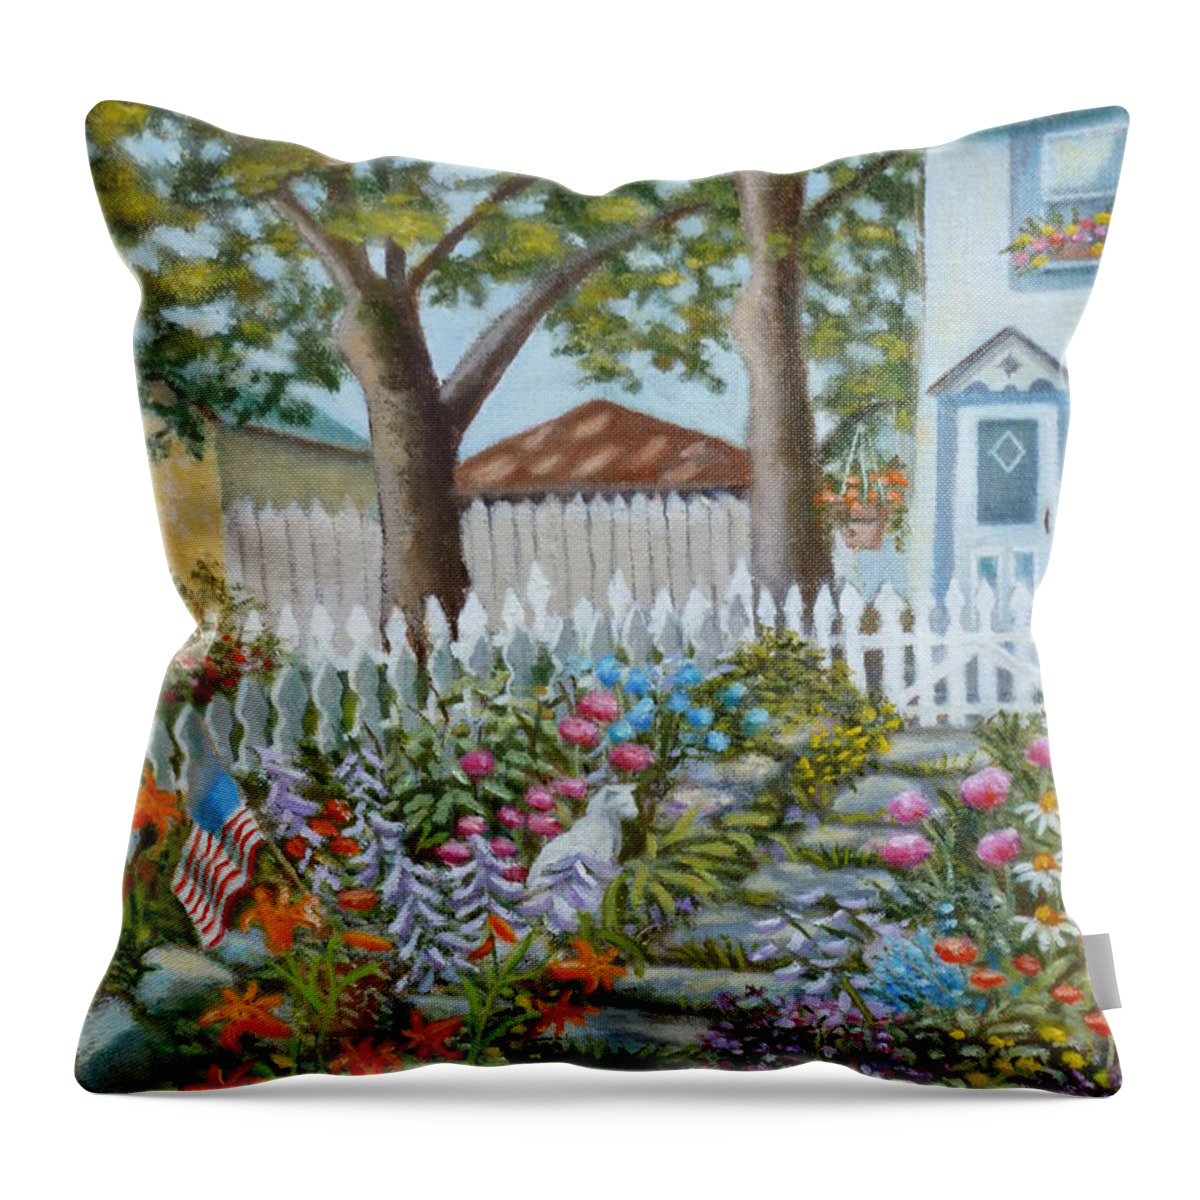 White Cat Throw Pillow featuring the painting The Garden Of Indiscrimitive Plantings. by Madeline Lovallo